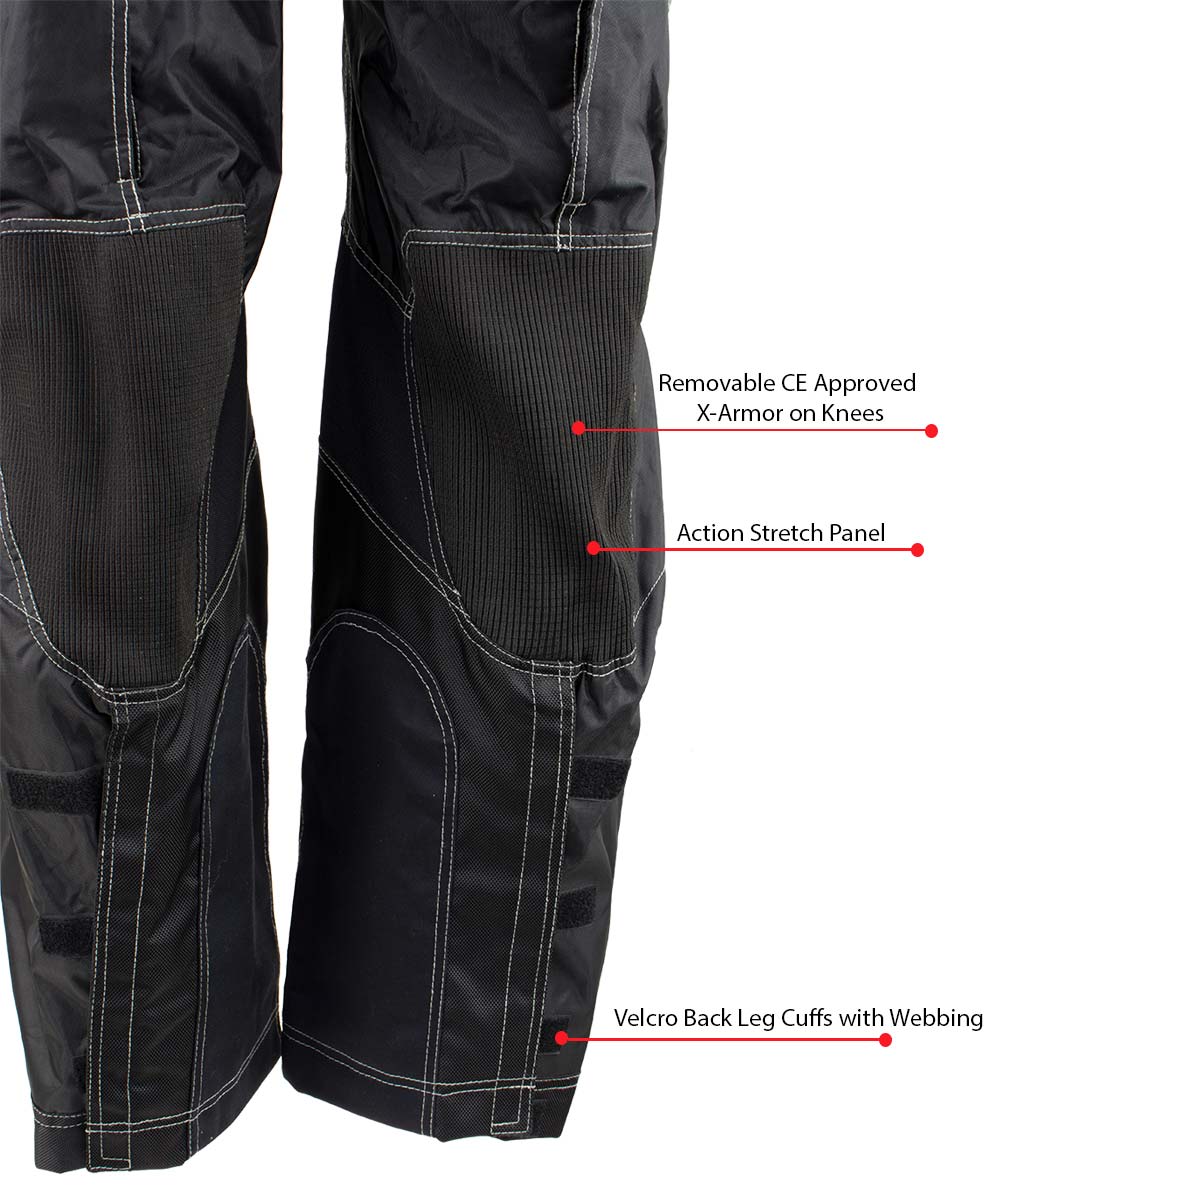 Xelement B4402 Men's Advanced Black and Grey Advanced X-Armored Tri-Tex Fabric Motorcycle Pants